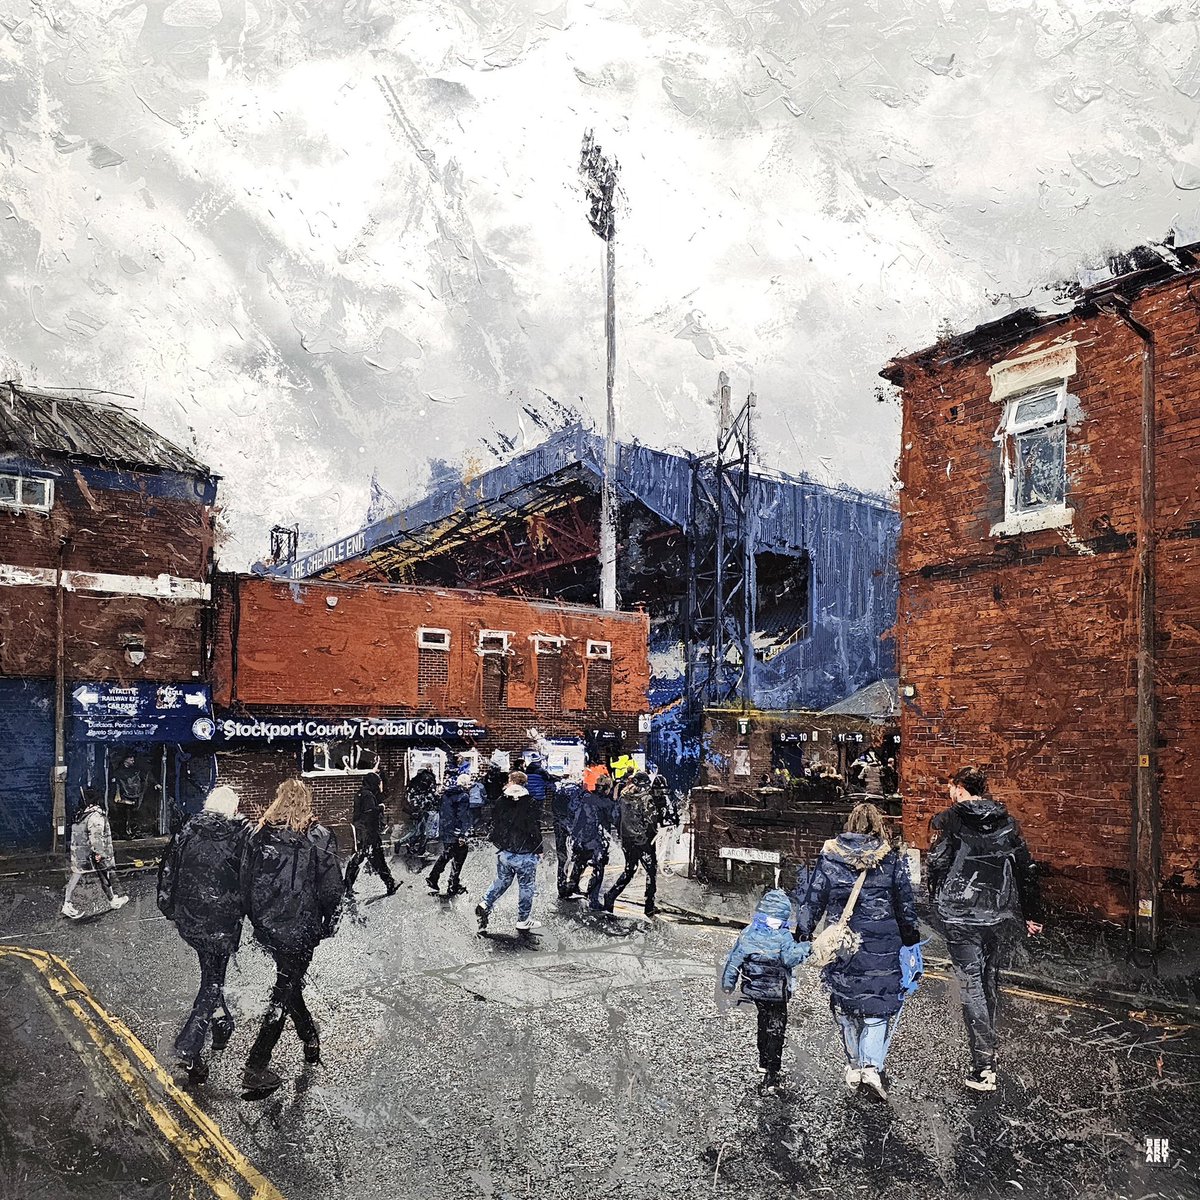 Some new pieces have just arrived in the gallery by Ben Ark featuring the Champions… Stockport County 🏆

#BenArk #StockportCounty